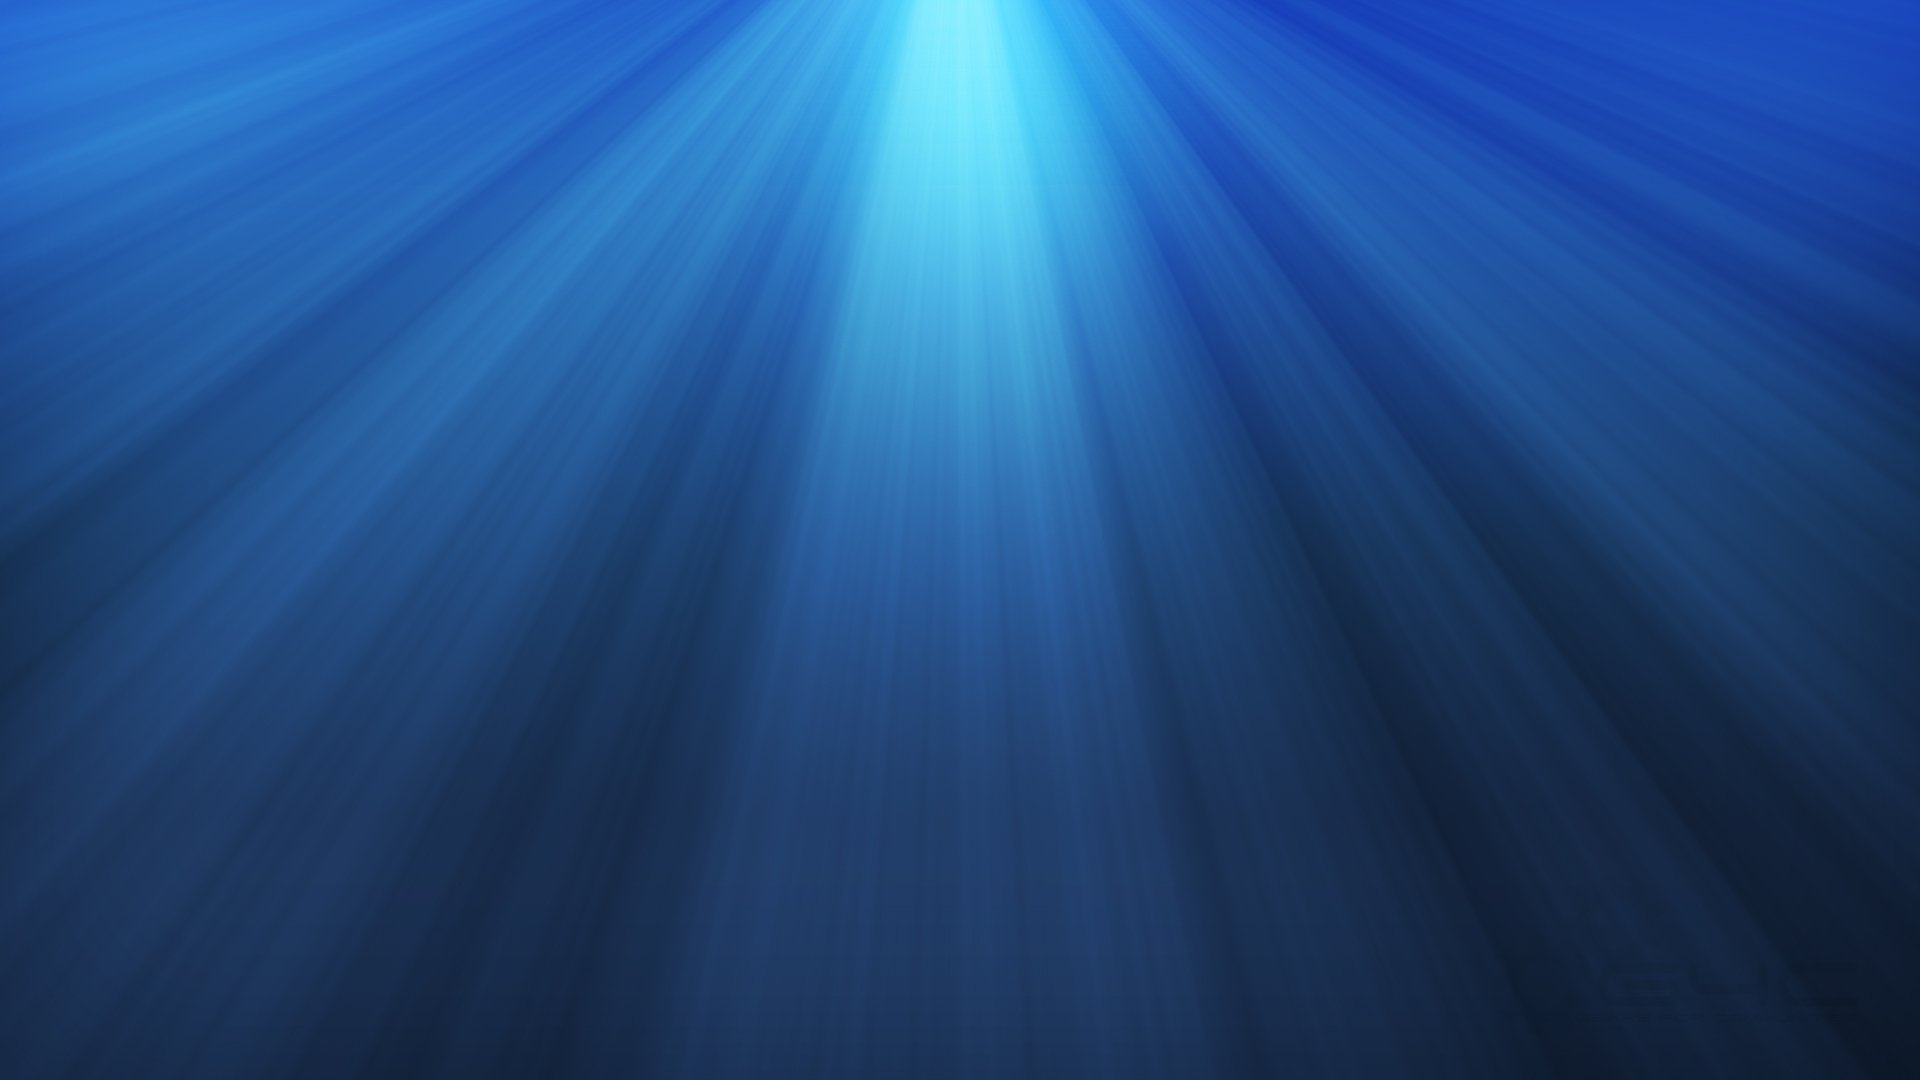 30 HD Blue WallpapersBackgrounds For Download 1920x1080